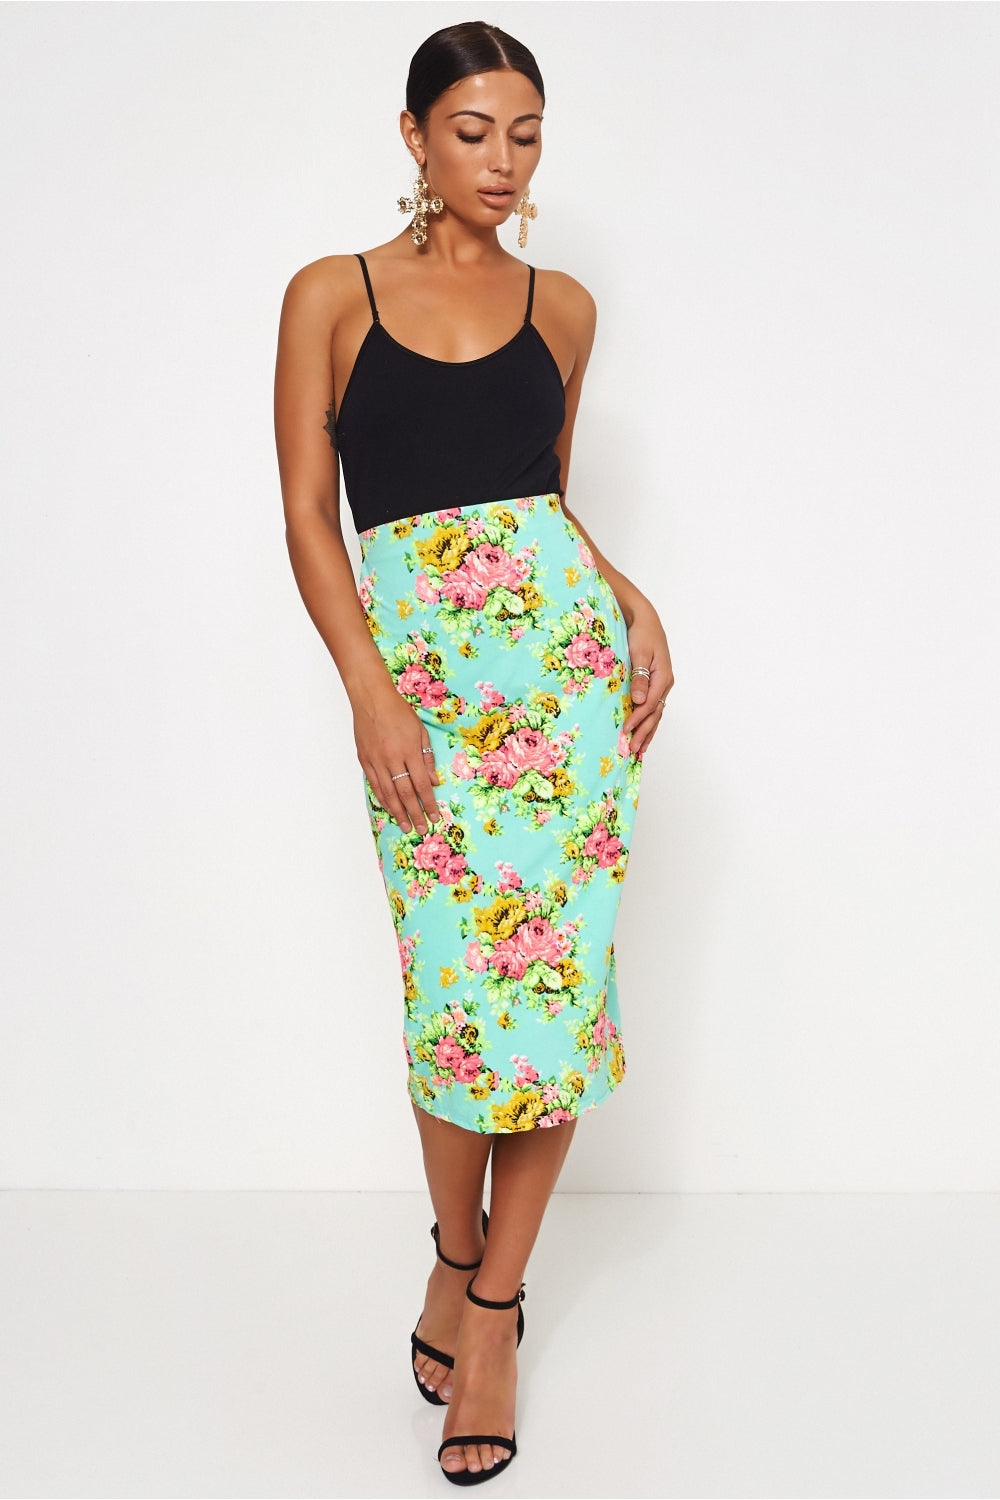 Green & Pink Floral Bodycon Skirt